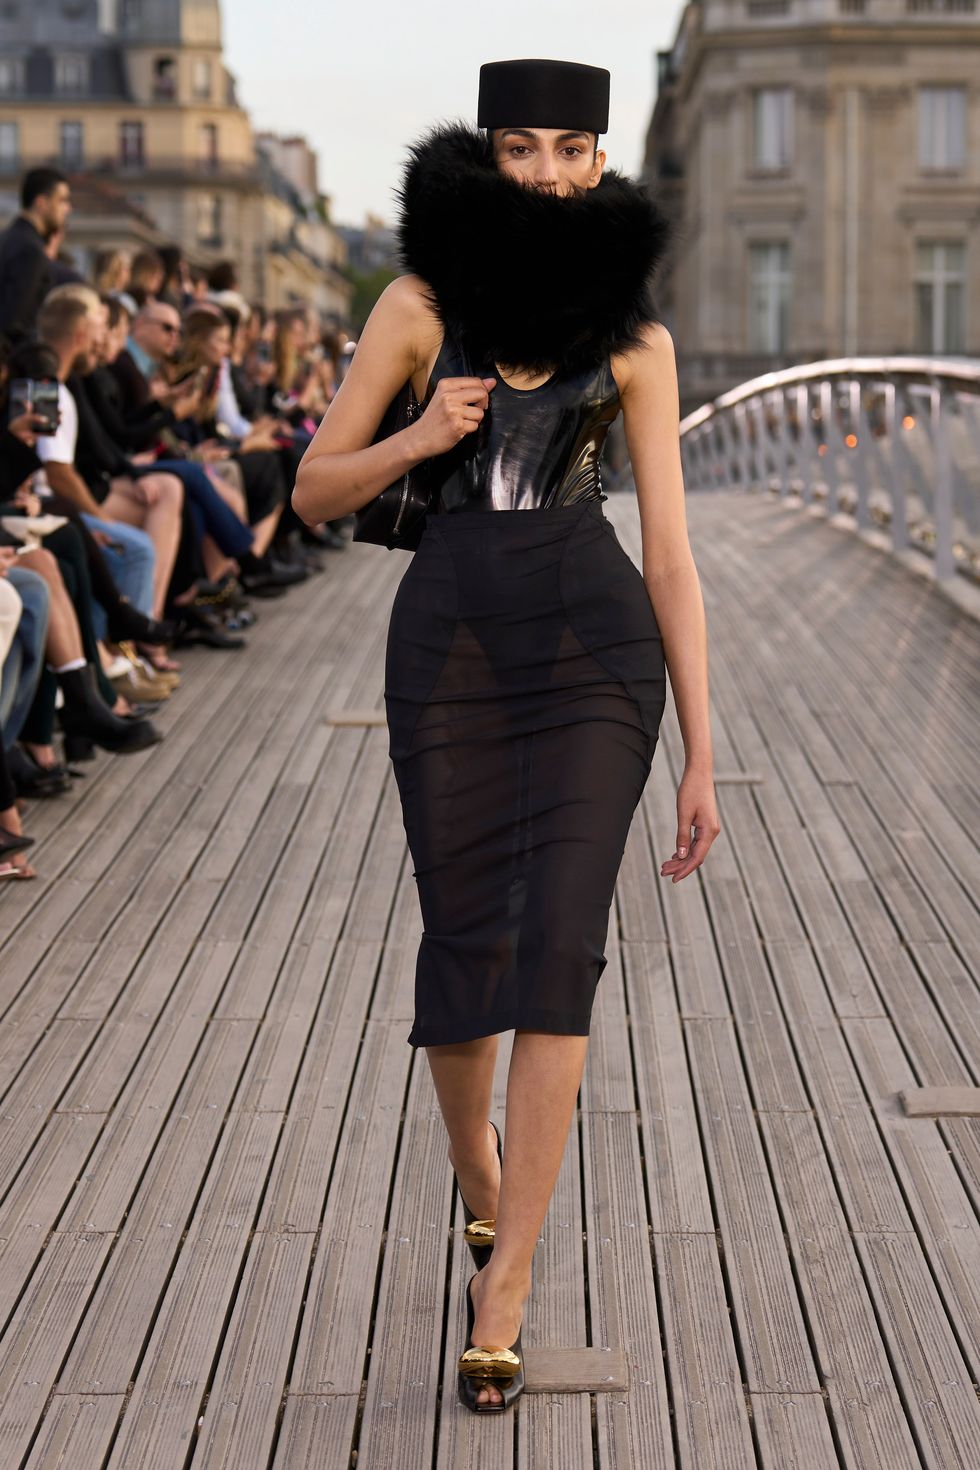 a woman wearing a black dress and black hat walking on a wooden deck